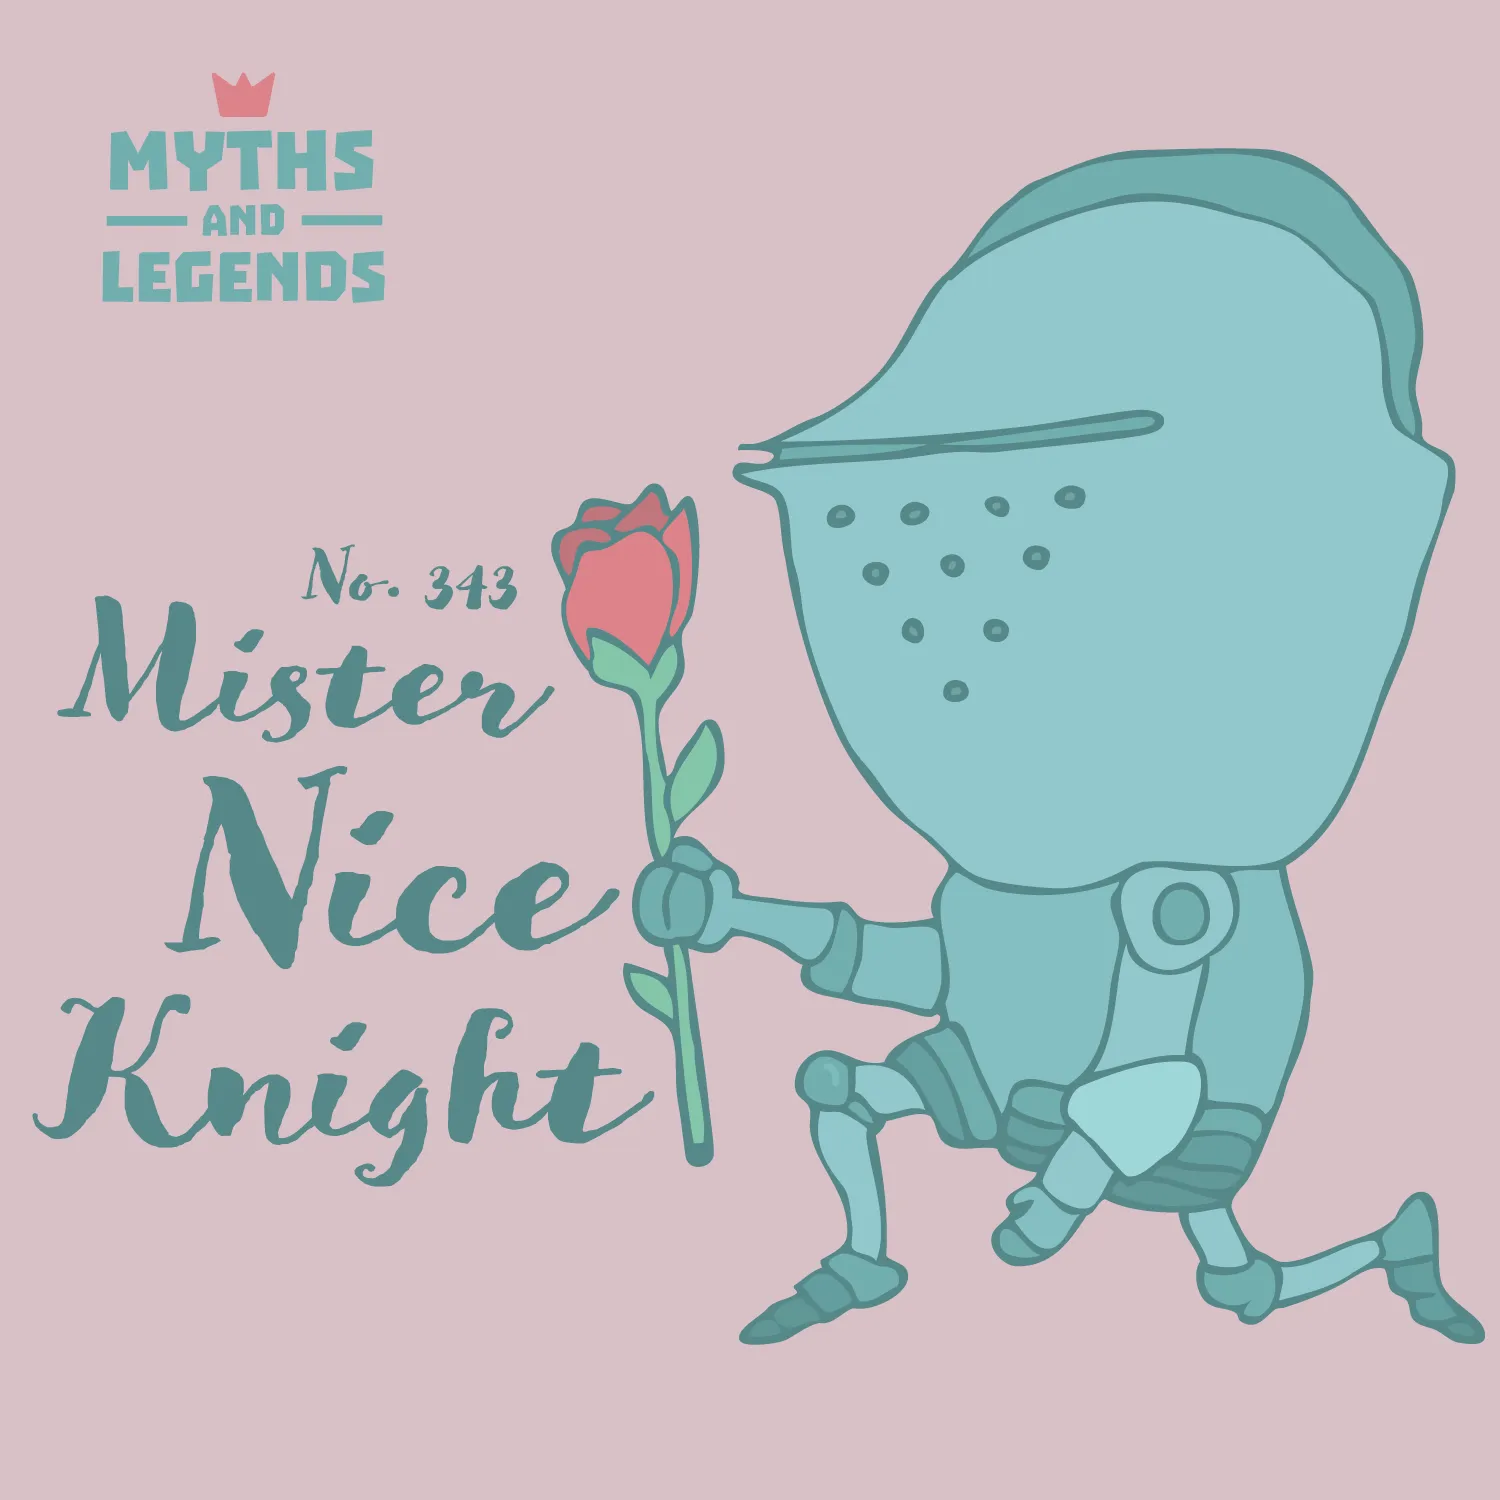 A playful illustration of a knight in pale blue armor kneeling and offering a single red rose. The knight's visor is down, and the armor is drawn in a cartoonish, rounded style. Above the knight, the text "MYTHS AND LEGENDS" in small, red capital letters. The phrase "Mister Nice Knight" is written in a whimsical, cursive font below the knight, set against a soft pink background, emphasizing the gentle, chivalrous theme of the image.